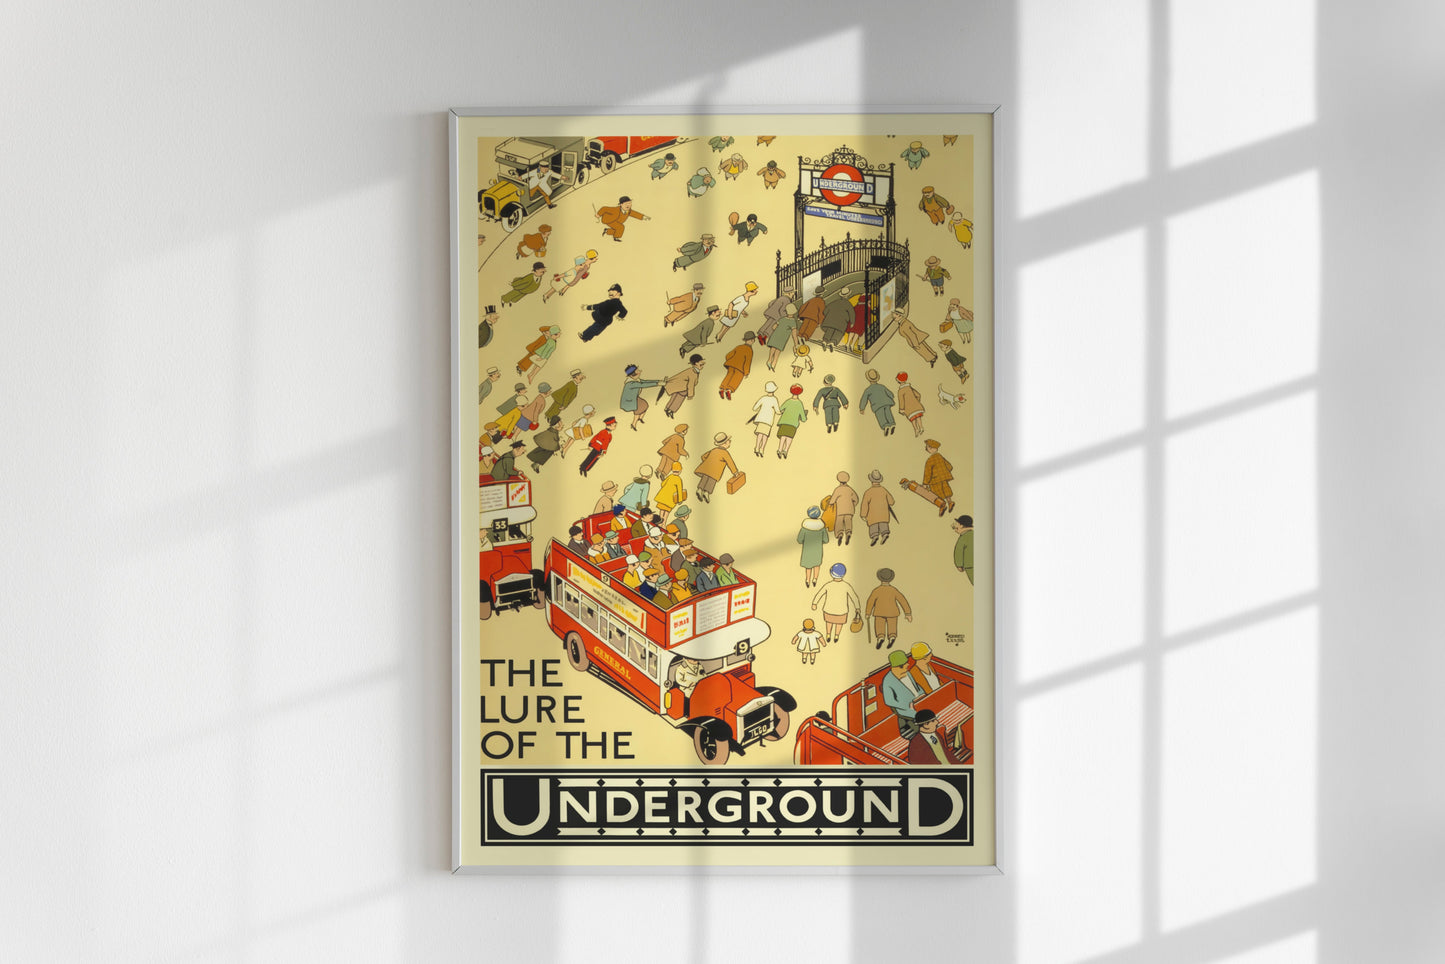 The Lure of the Underground